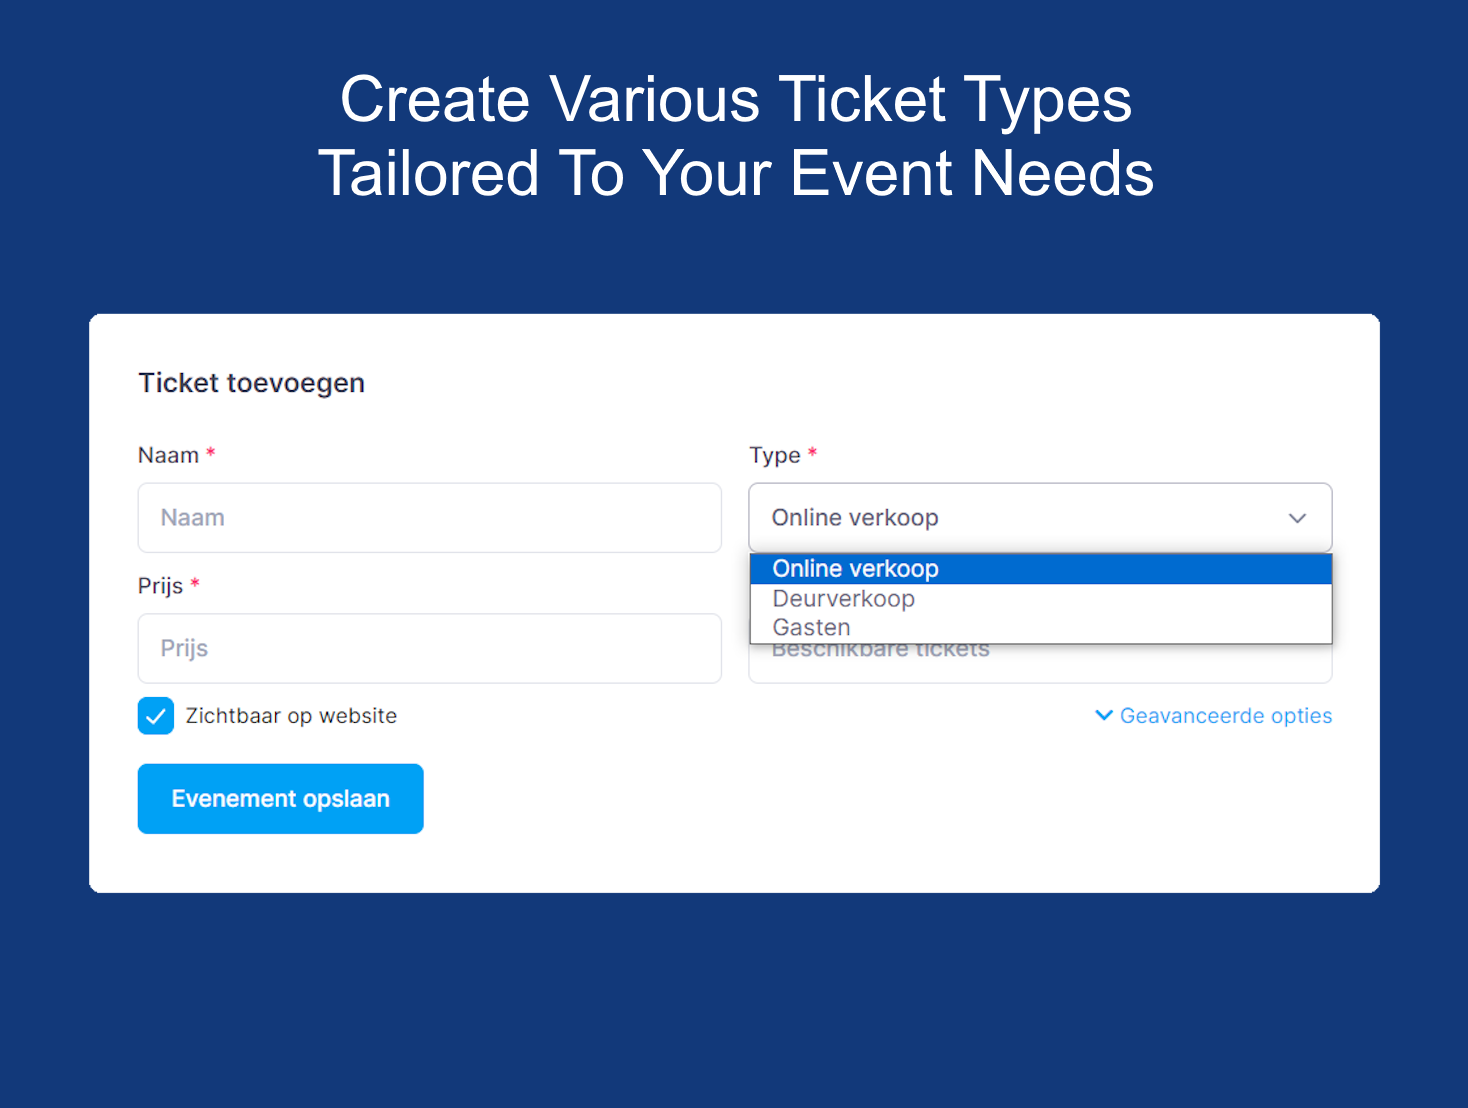 Easily Add Multiple Ticket Types for your Event